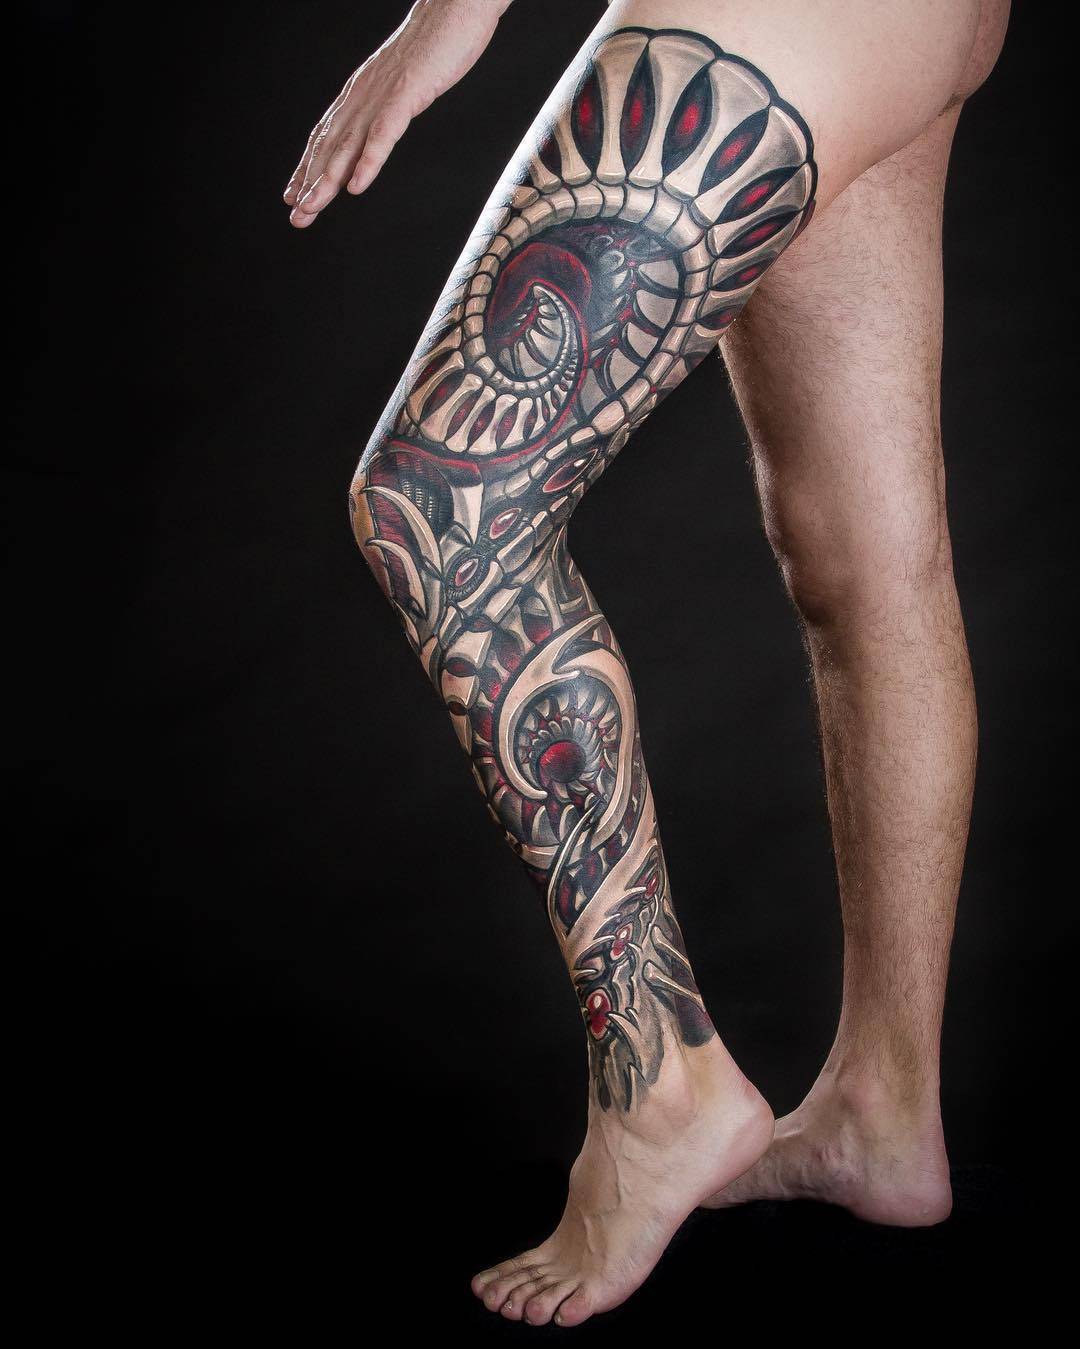 Full body suit biomechanical tattoos by Javier Obregon